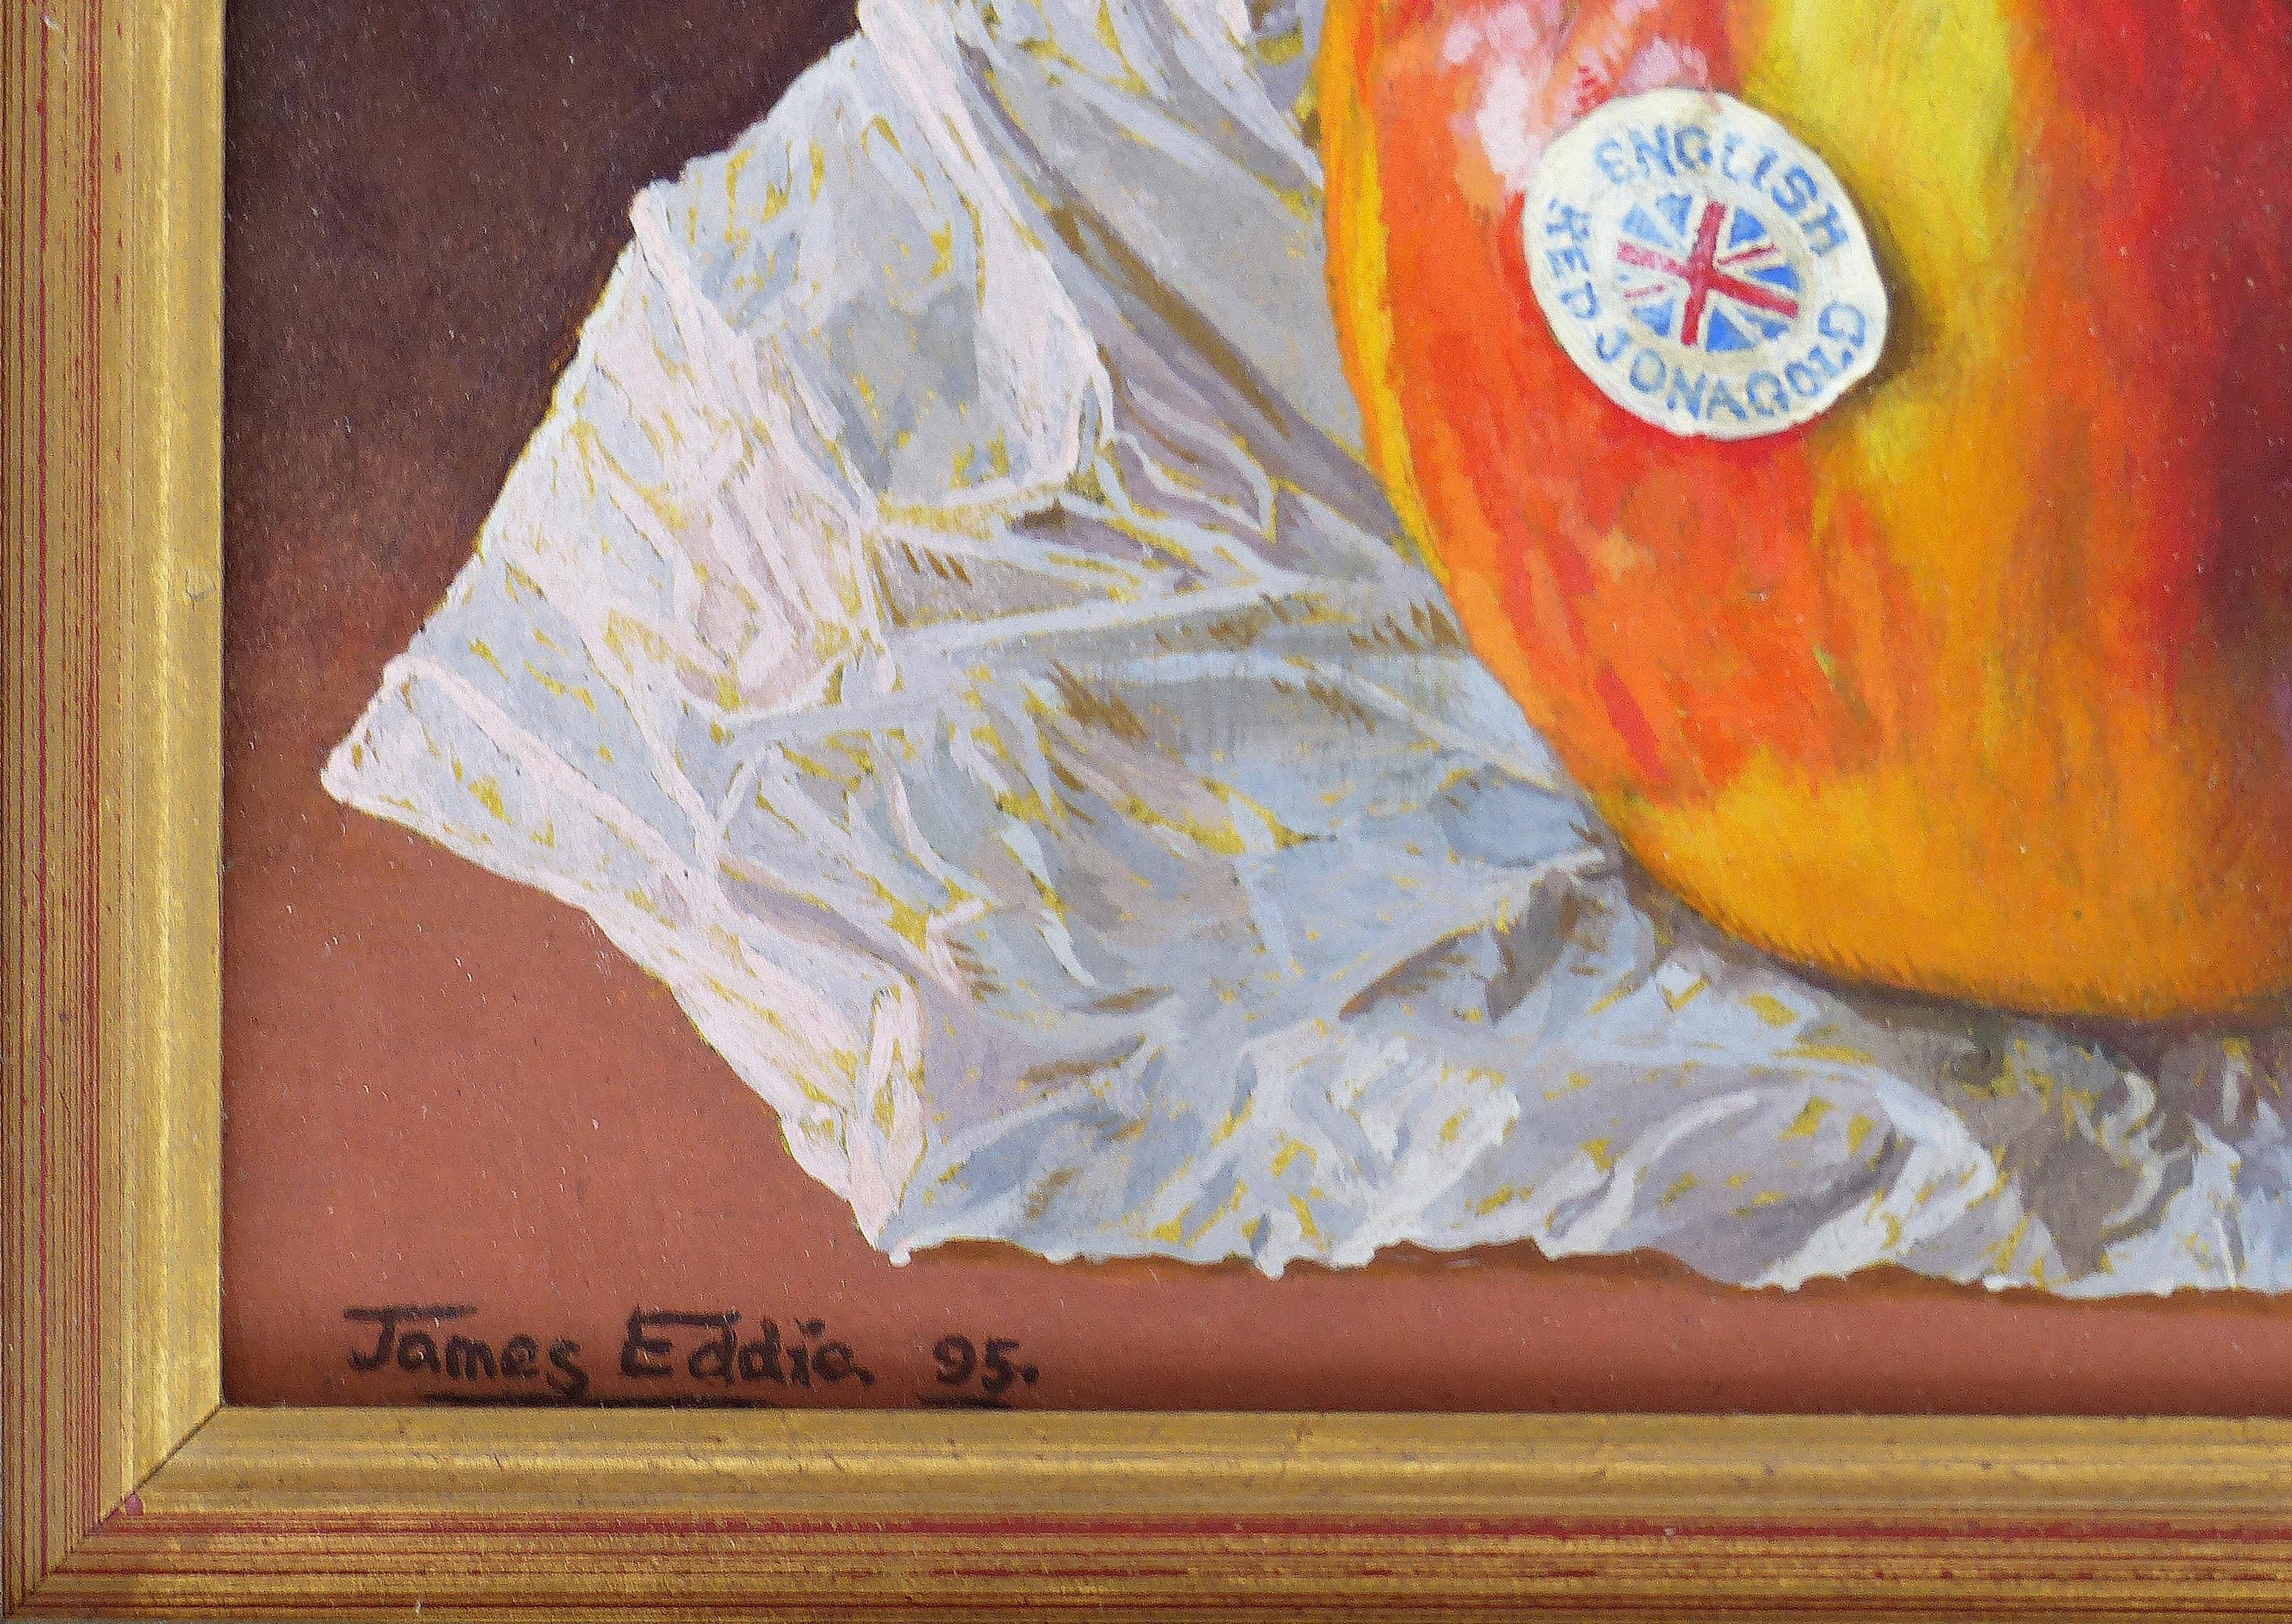 English Super-Realism Still-Life Apple Painting by James Eddie, 1995 For Sale